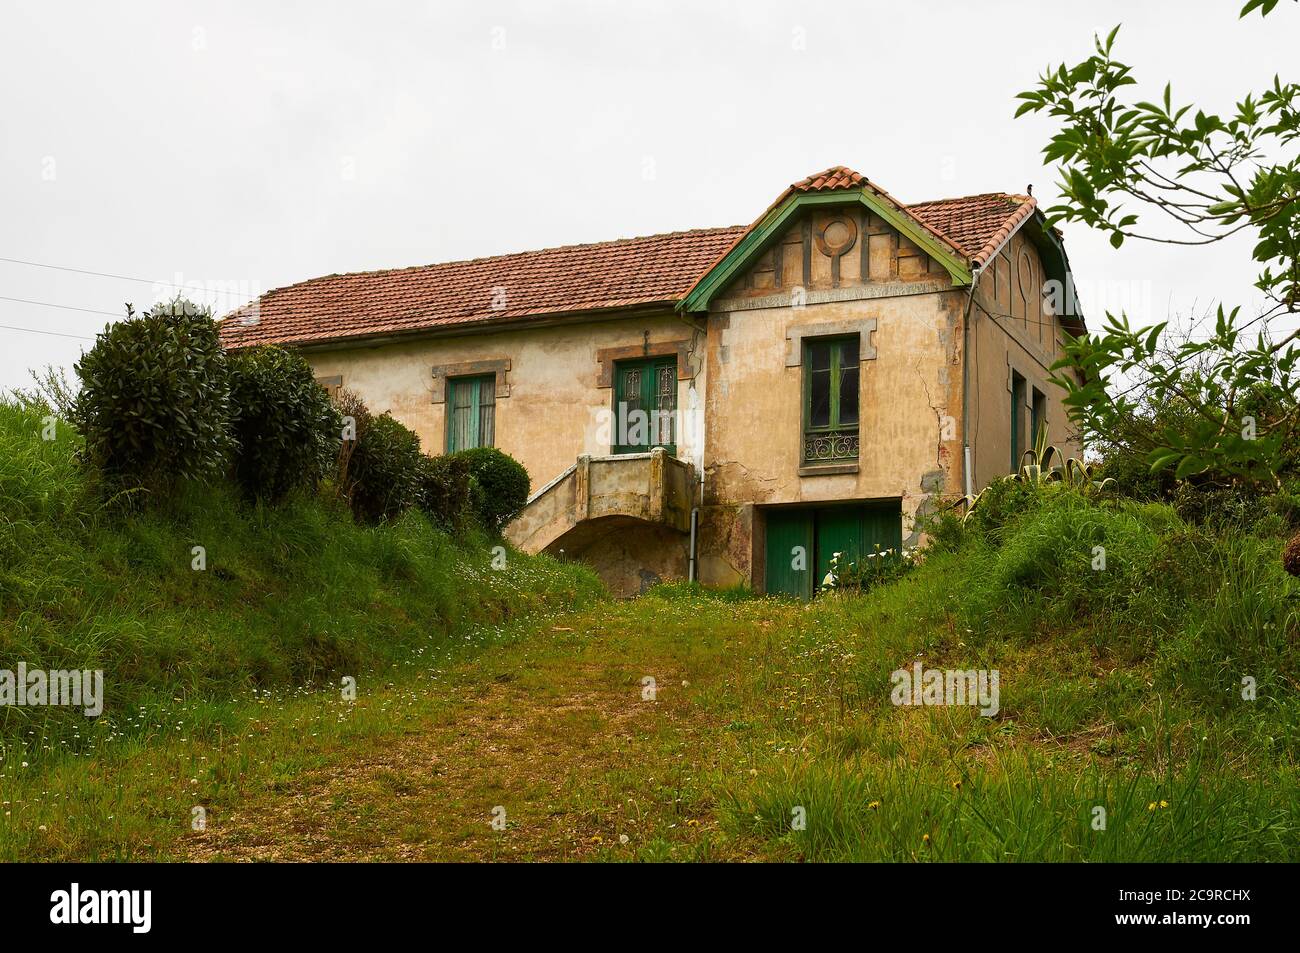 Abandoned typical old house in Salinas town, a famed seaside resort (Castrillón, Principality of Asturias, Spain) Stock Photo